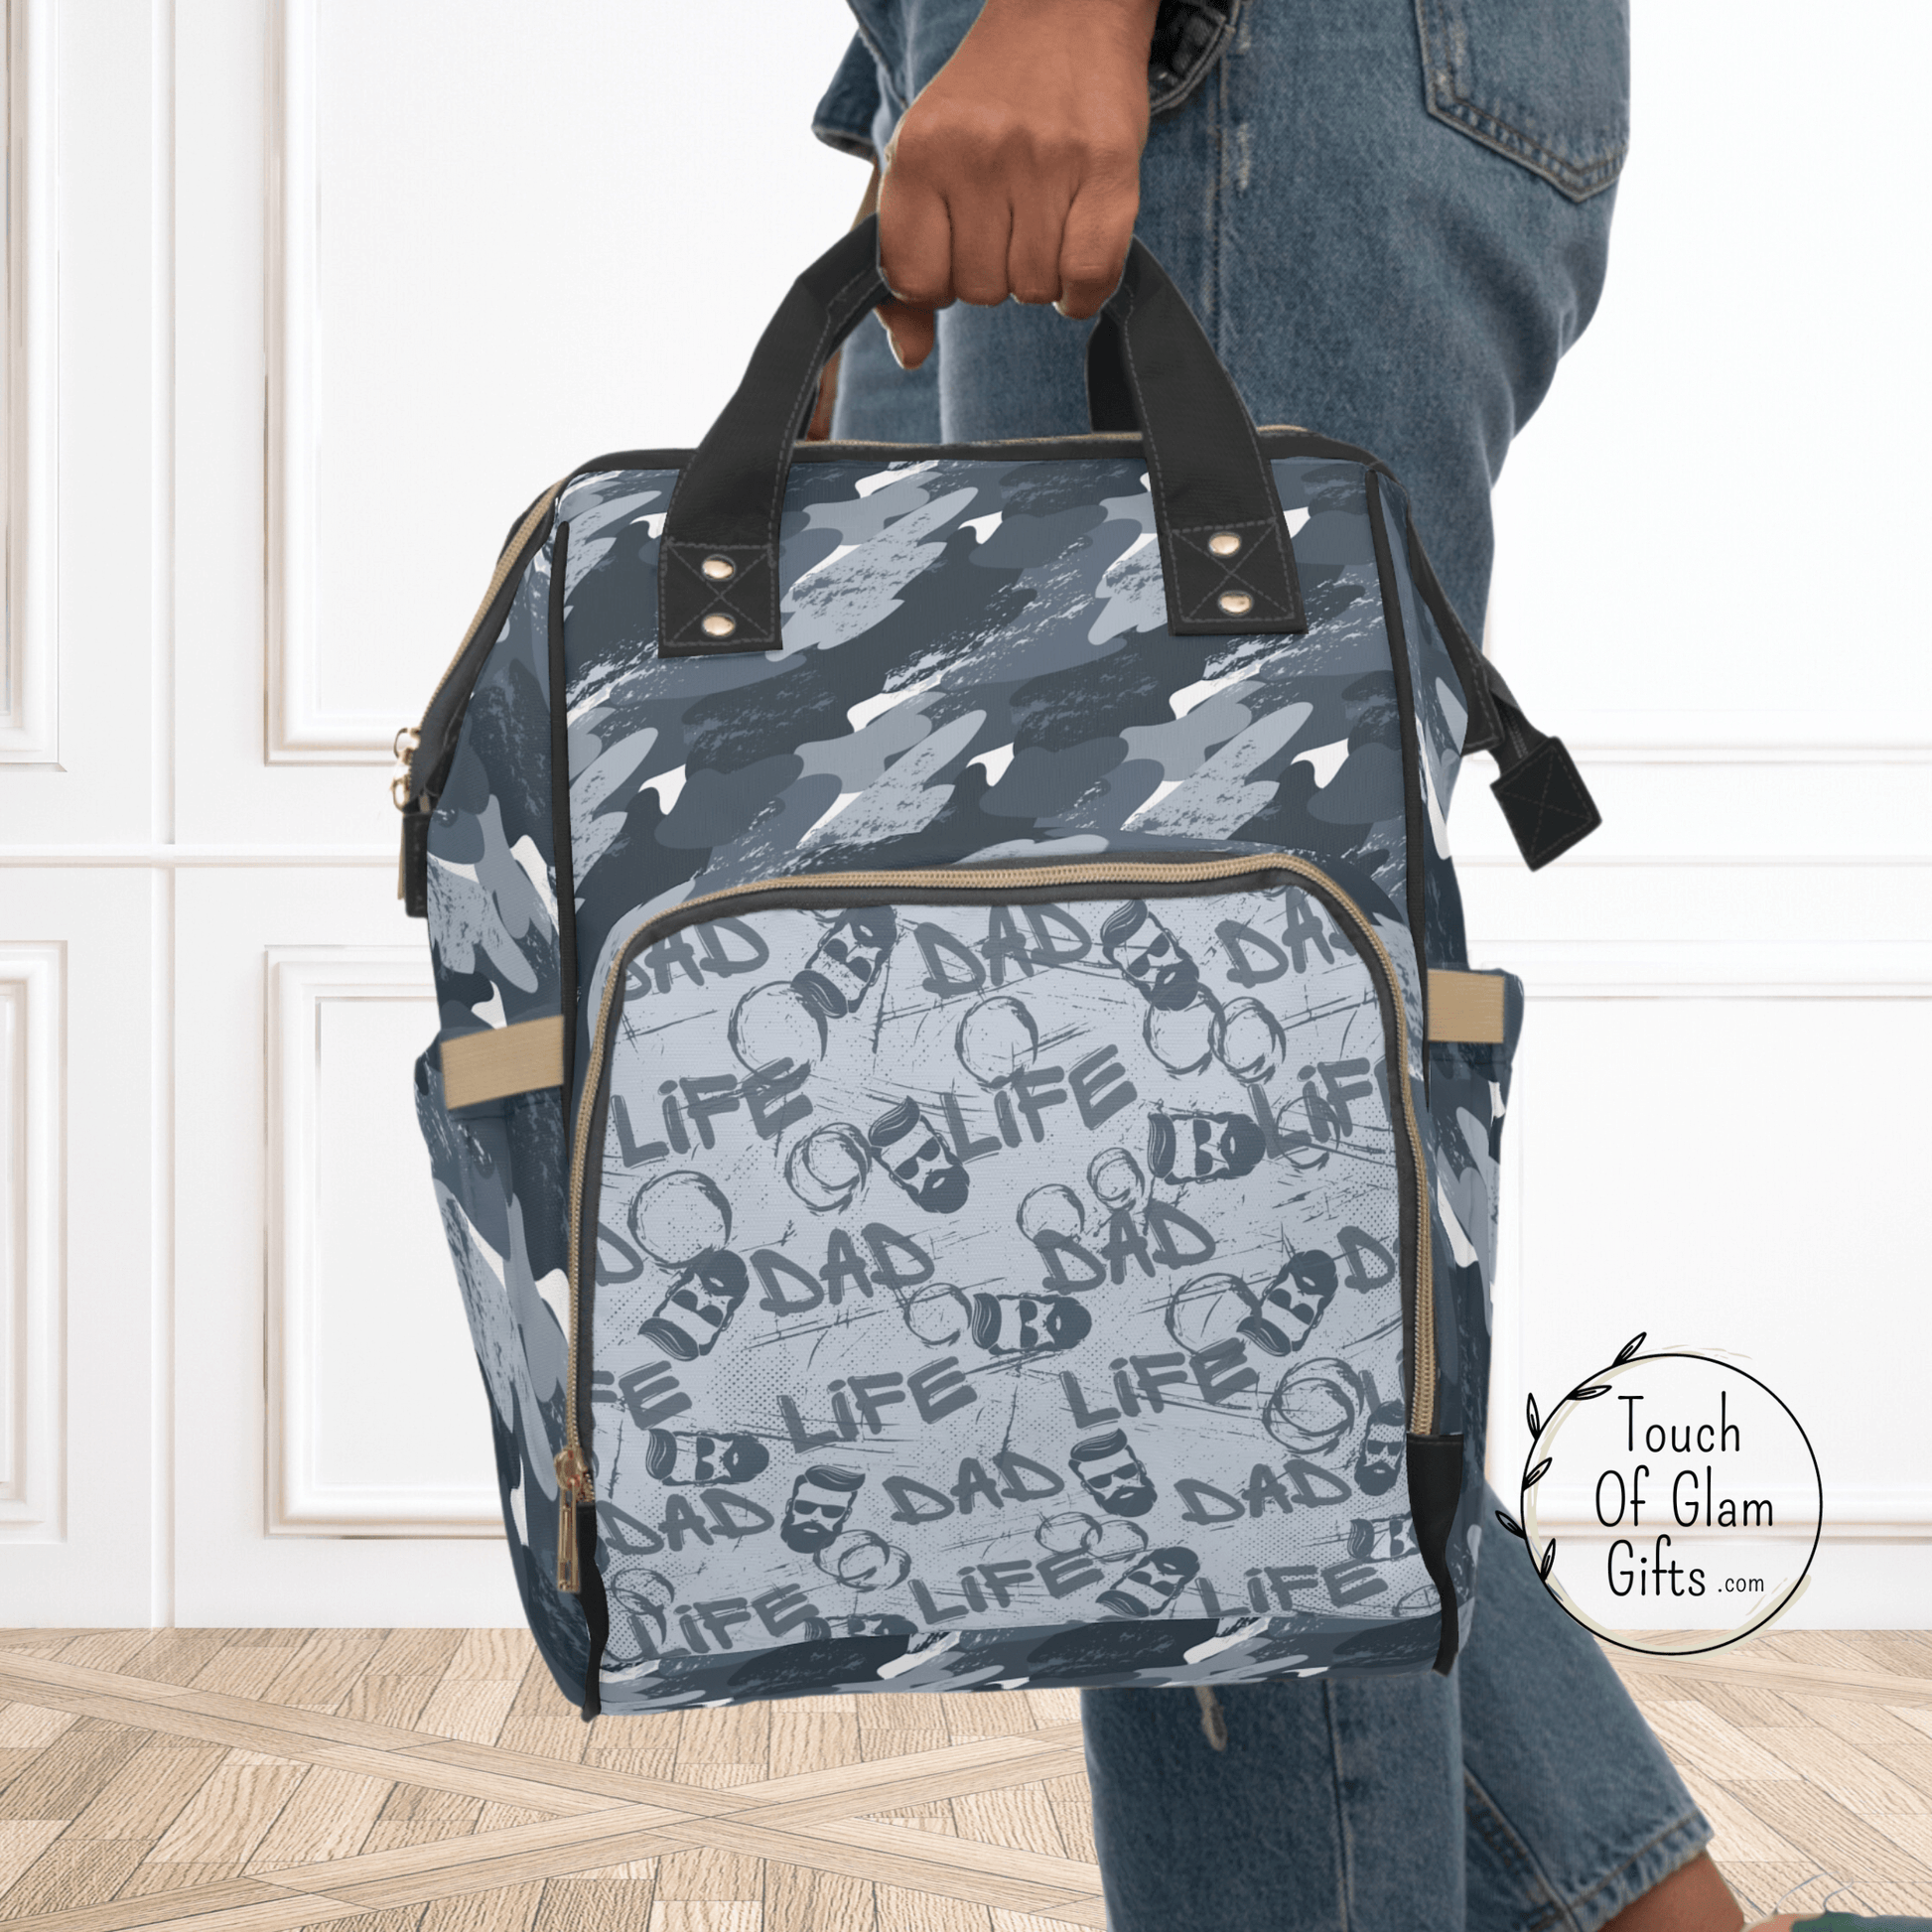 This blue camouflage diaper backpack was created just for dads. The front exterior, zippered pocket has the dad life, graffiti design that blends with the blue camo. This backpack is shown with the top carrying handles.